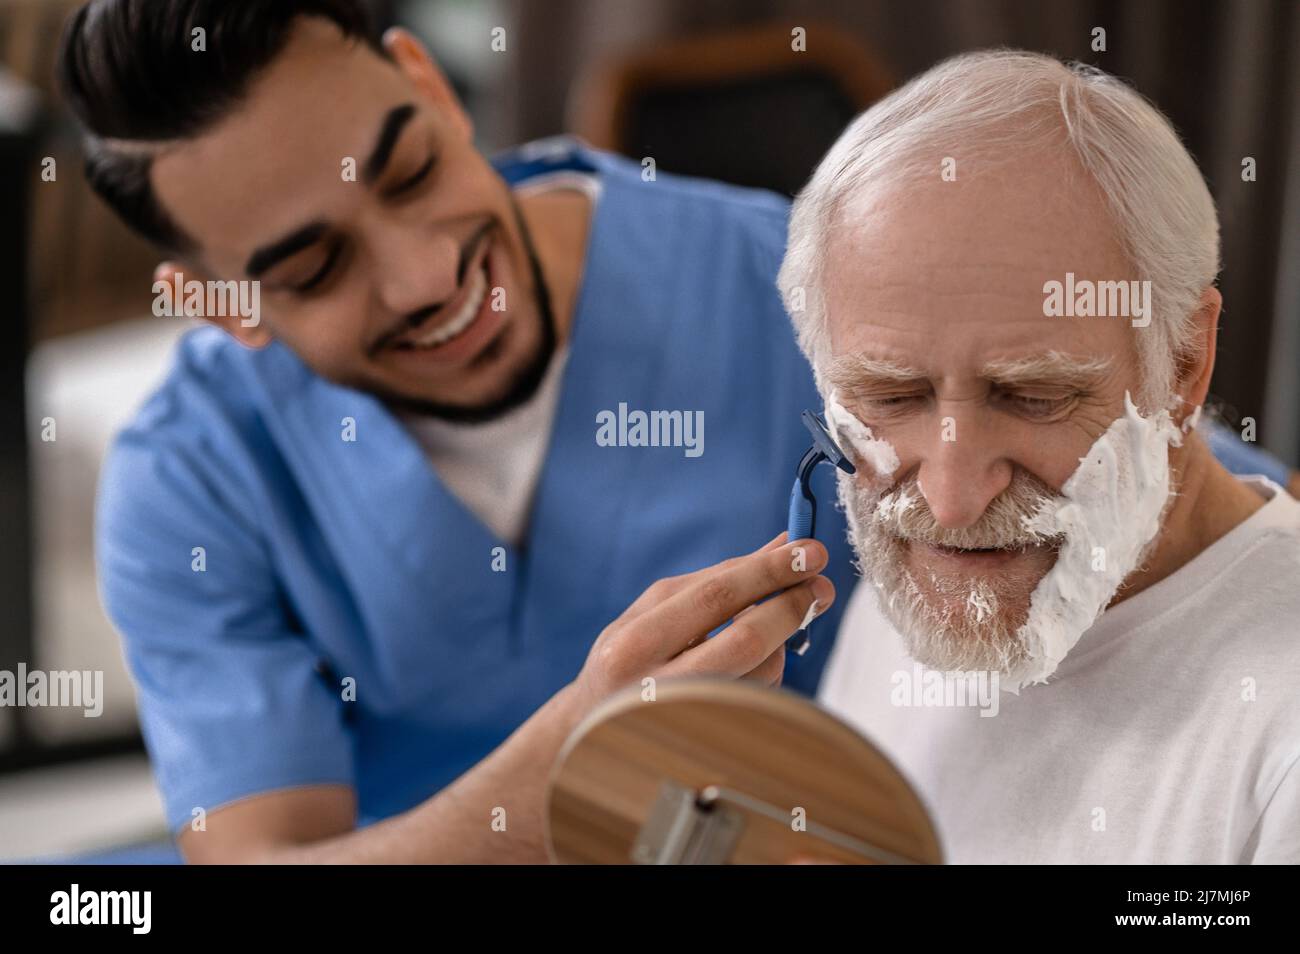 Cheerful volunteer giving an elderly person a shave Stock Photo